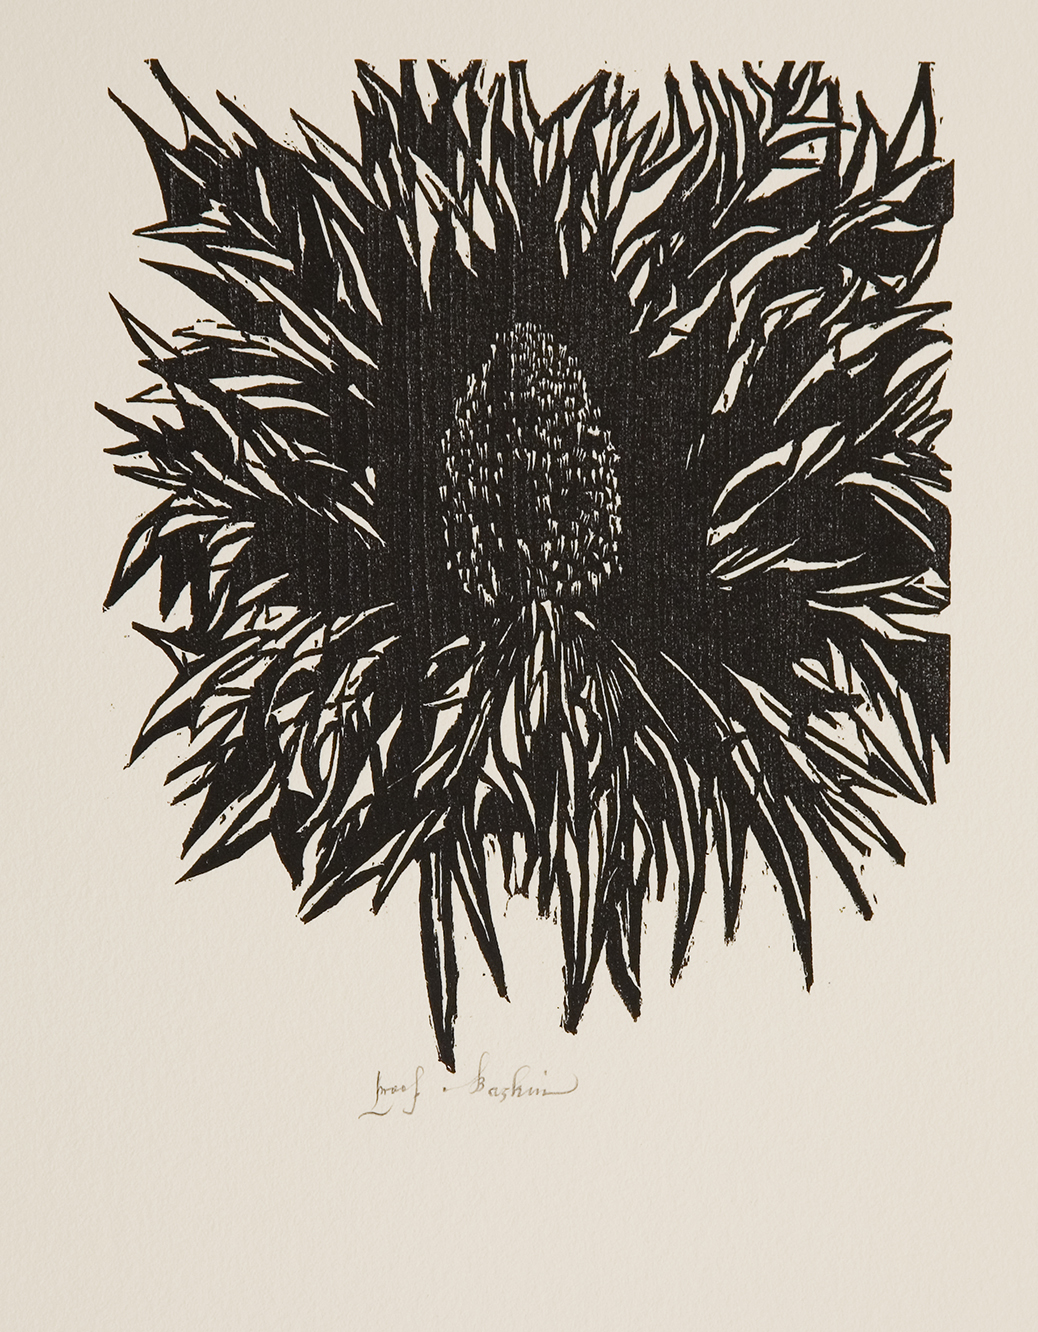 a woodblock print of a flower with many petals. The flower is printed in black ink and fills the whole page. In the middle is a large cone-shaped stamen or pistil.  